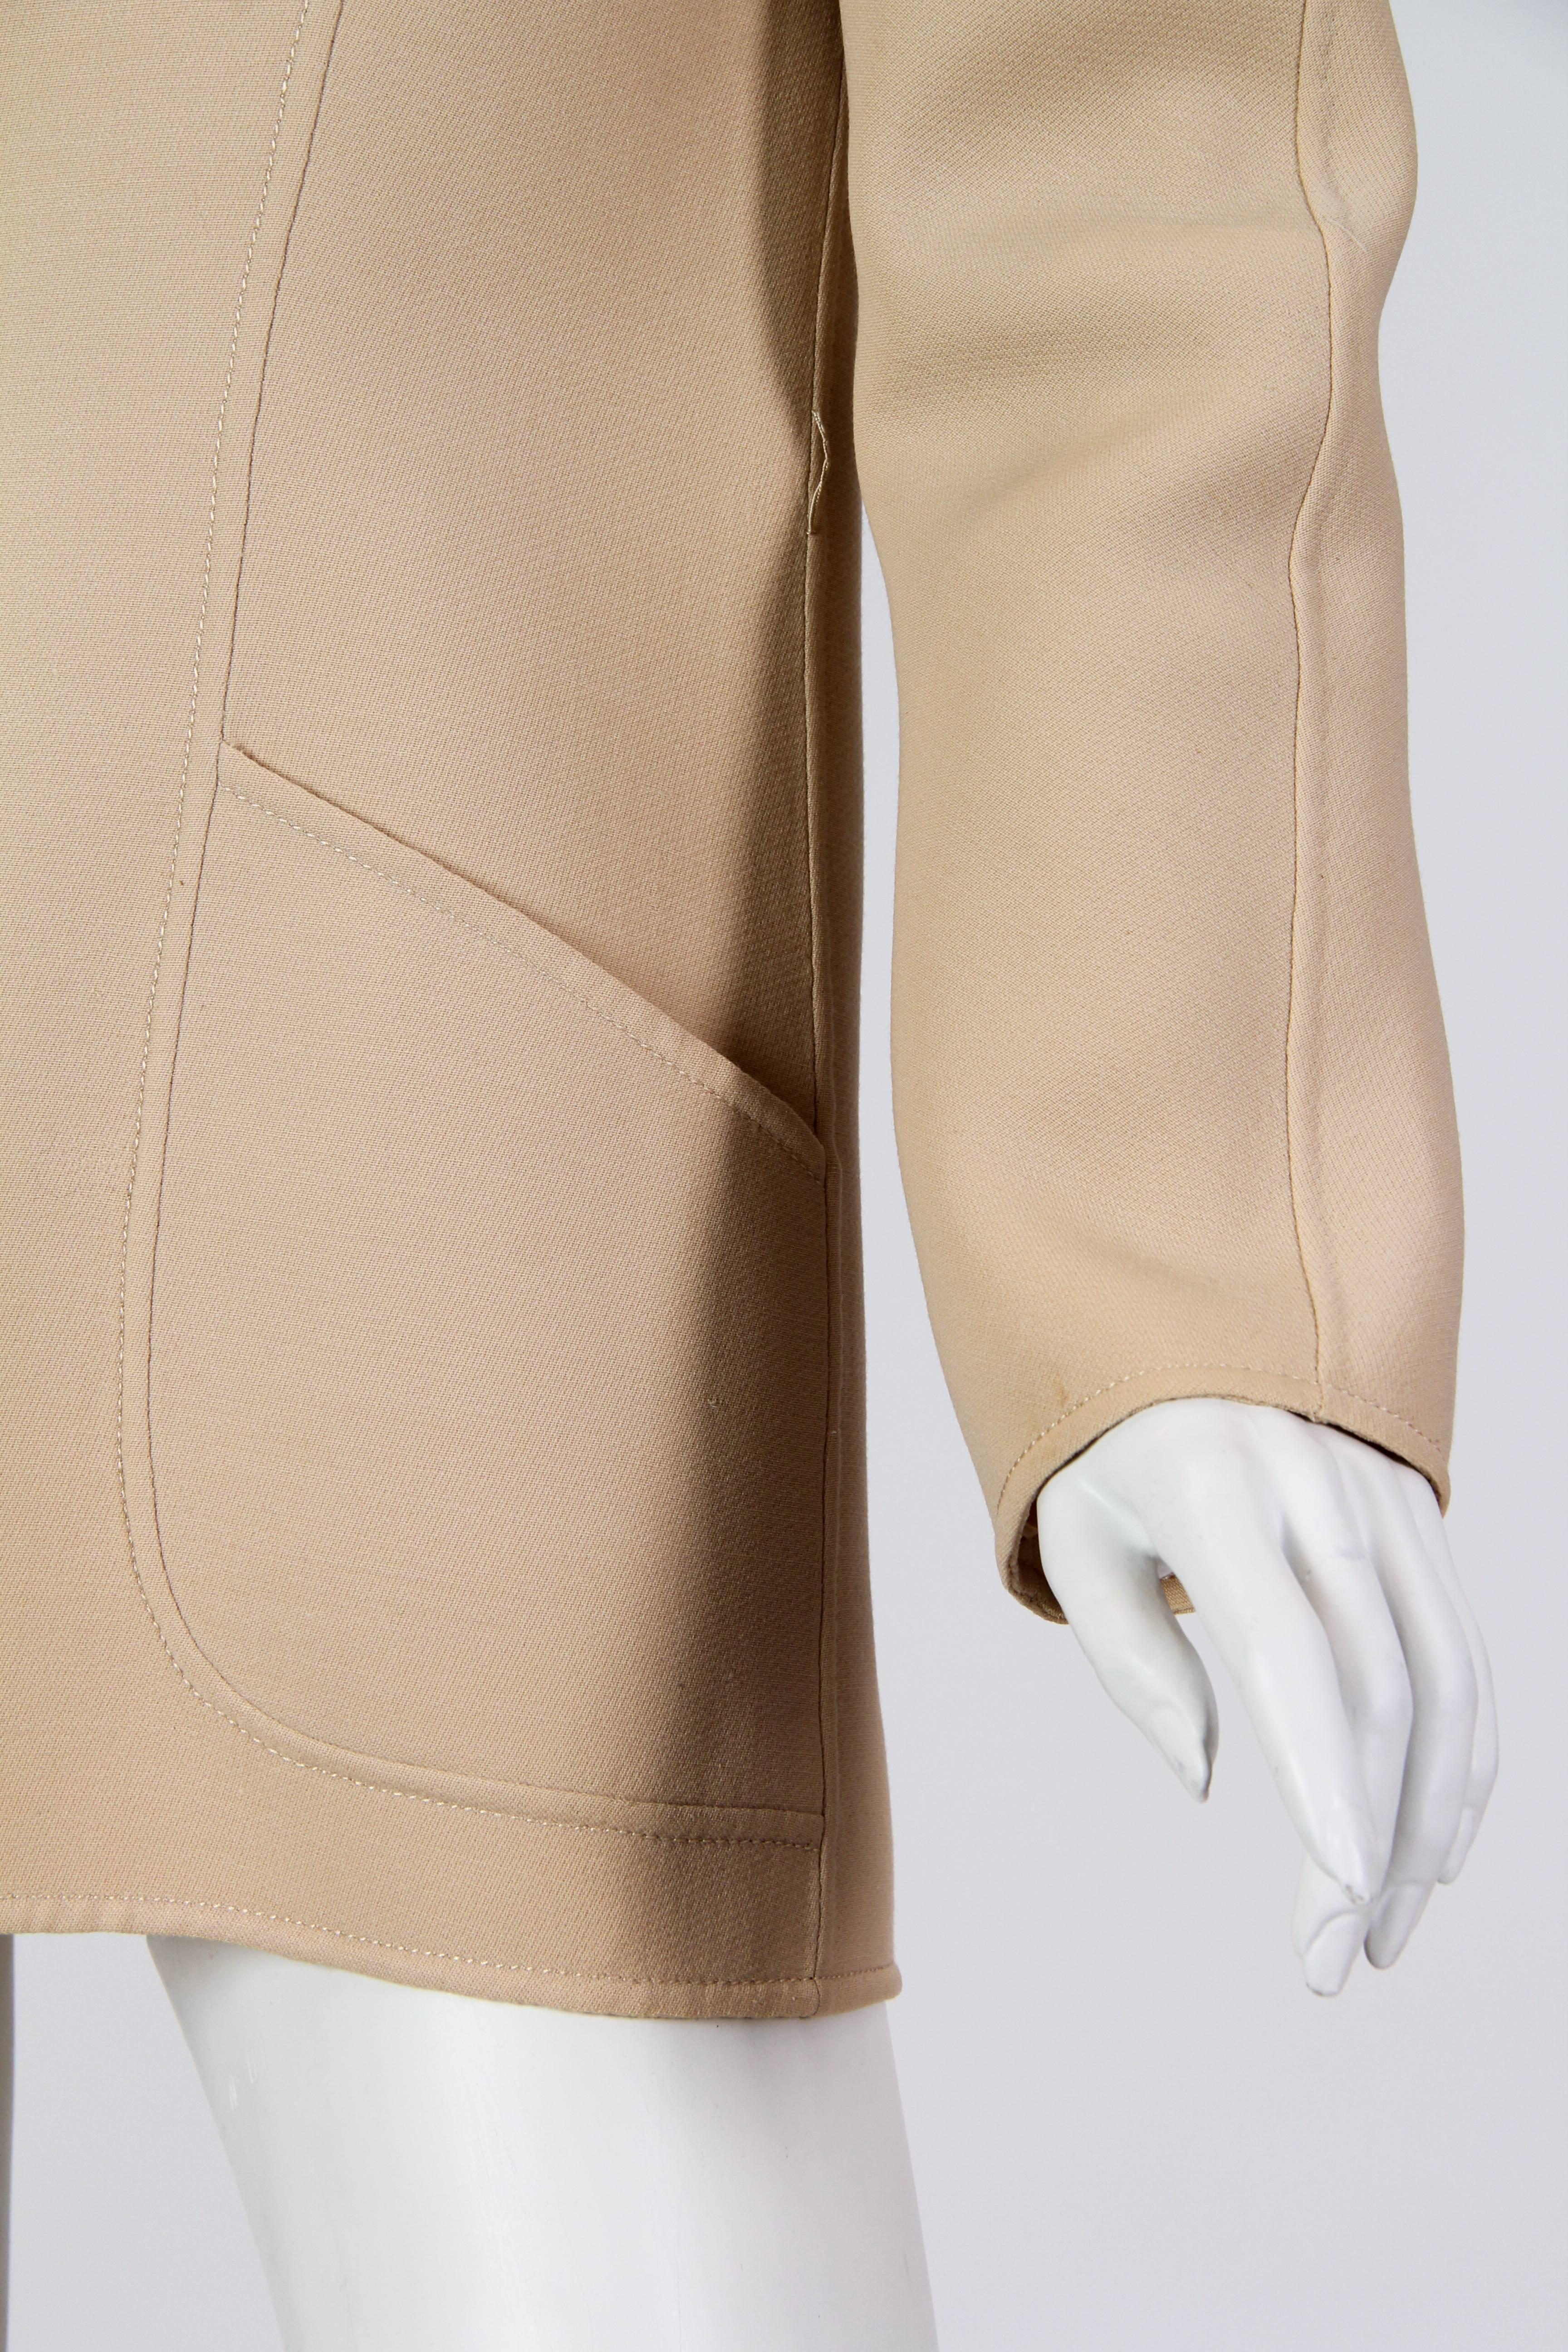 Valentino Couture 1960/70s Lightweight Wool Jacket 4